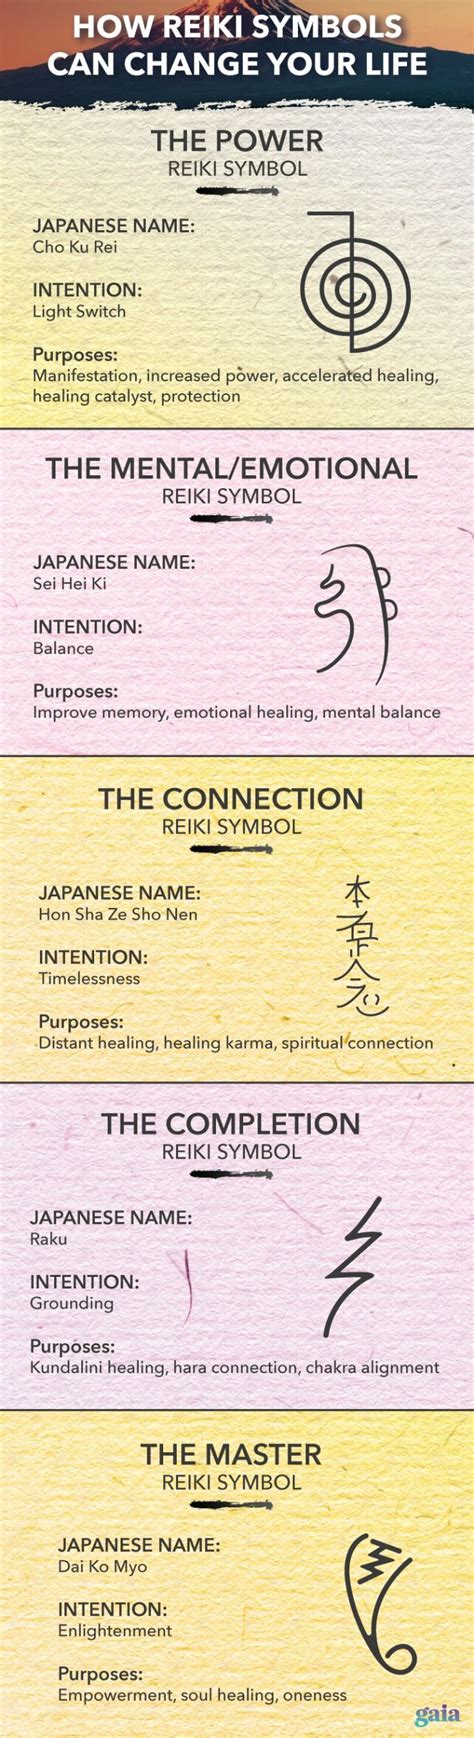 How Reiki Symbols Can Change Your Life | Strengthen ...